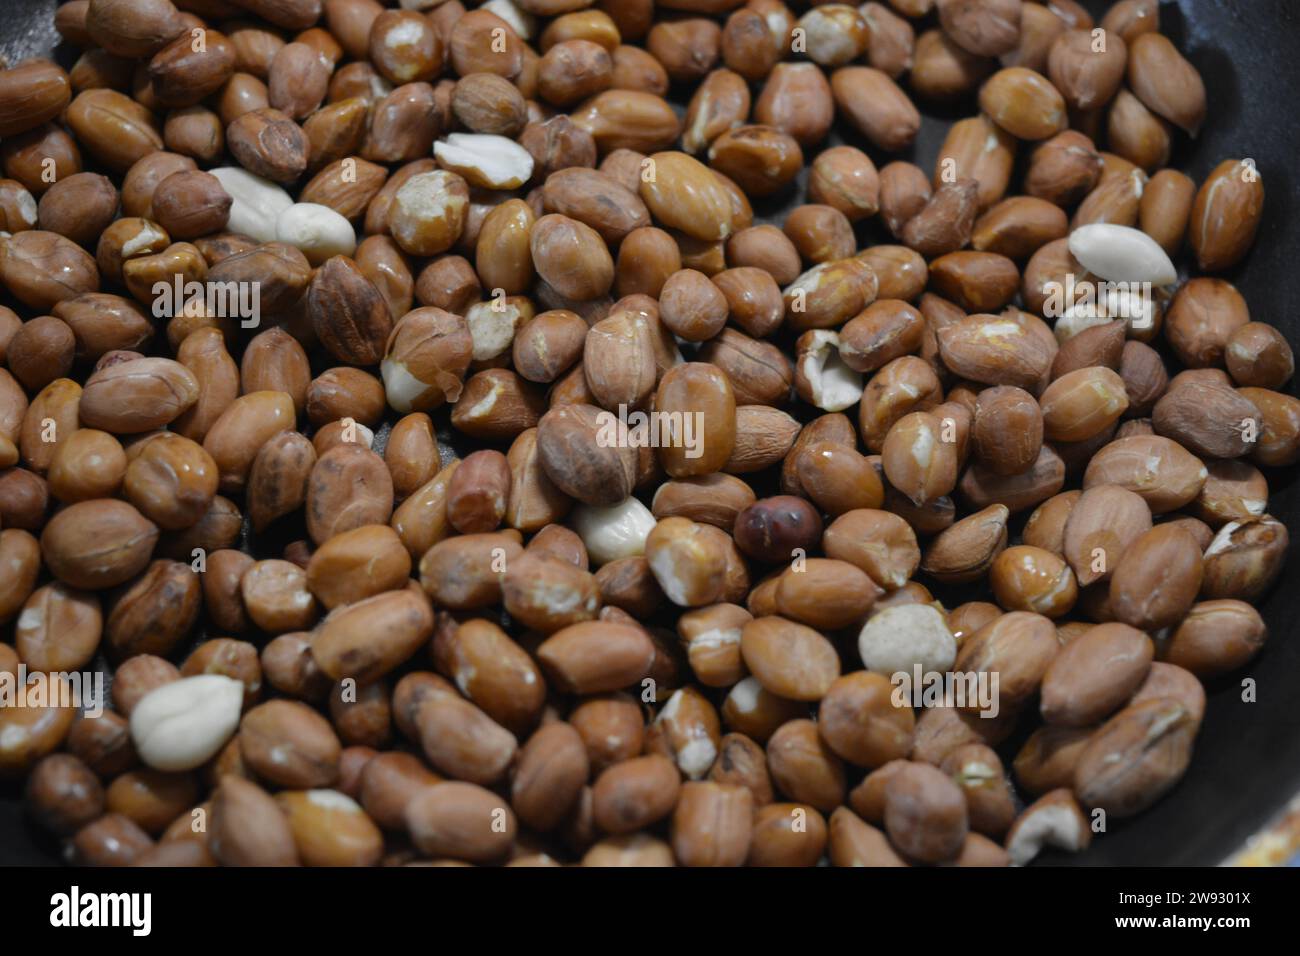 Fresh, roasted peanut pan, delicious and healthy nuts. Stock Photo